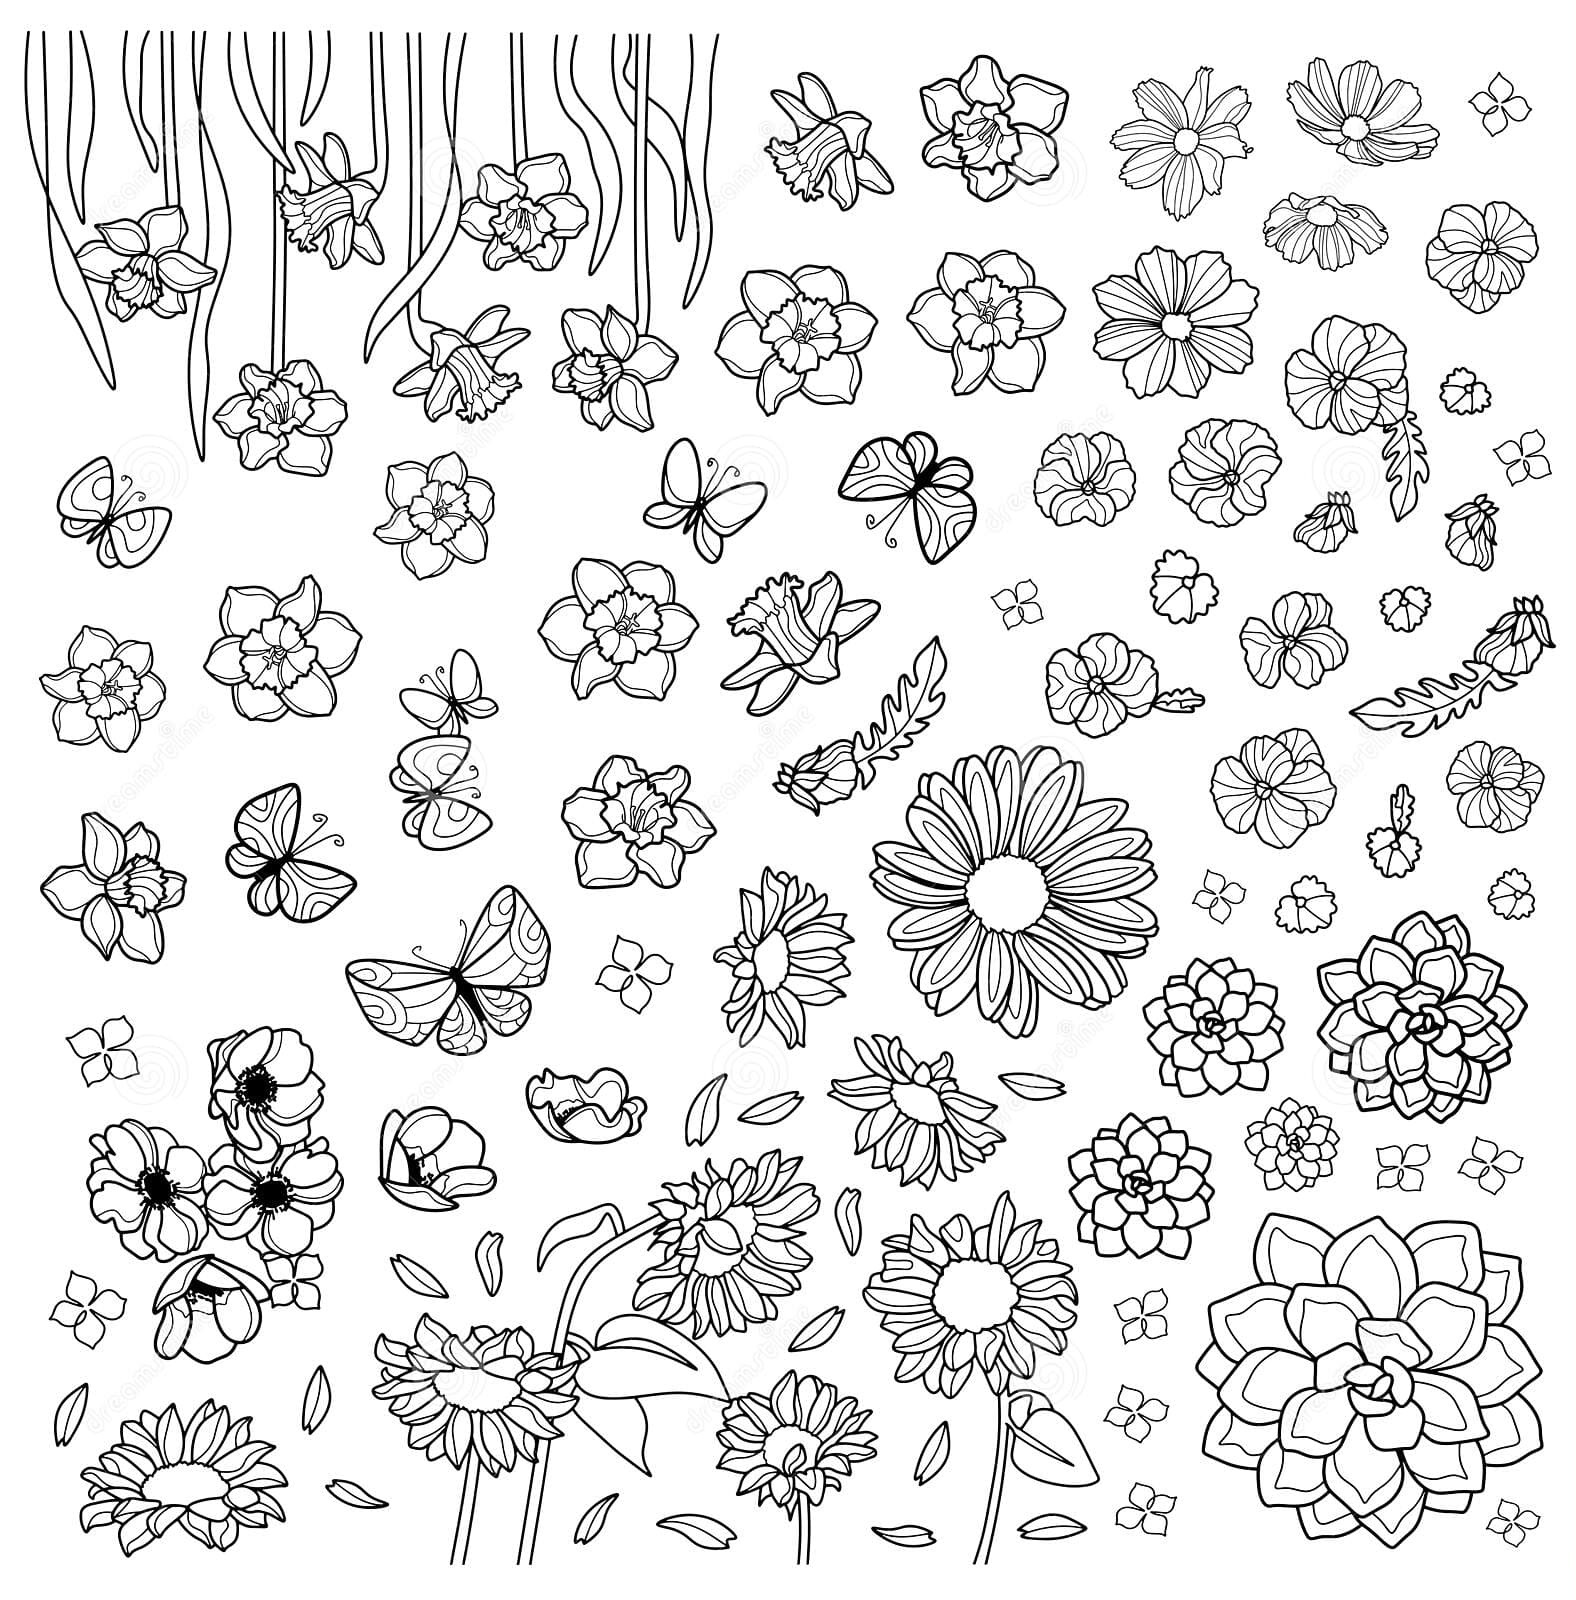 Coloring Page For Children And Adults Free Coloring Page